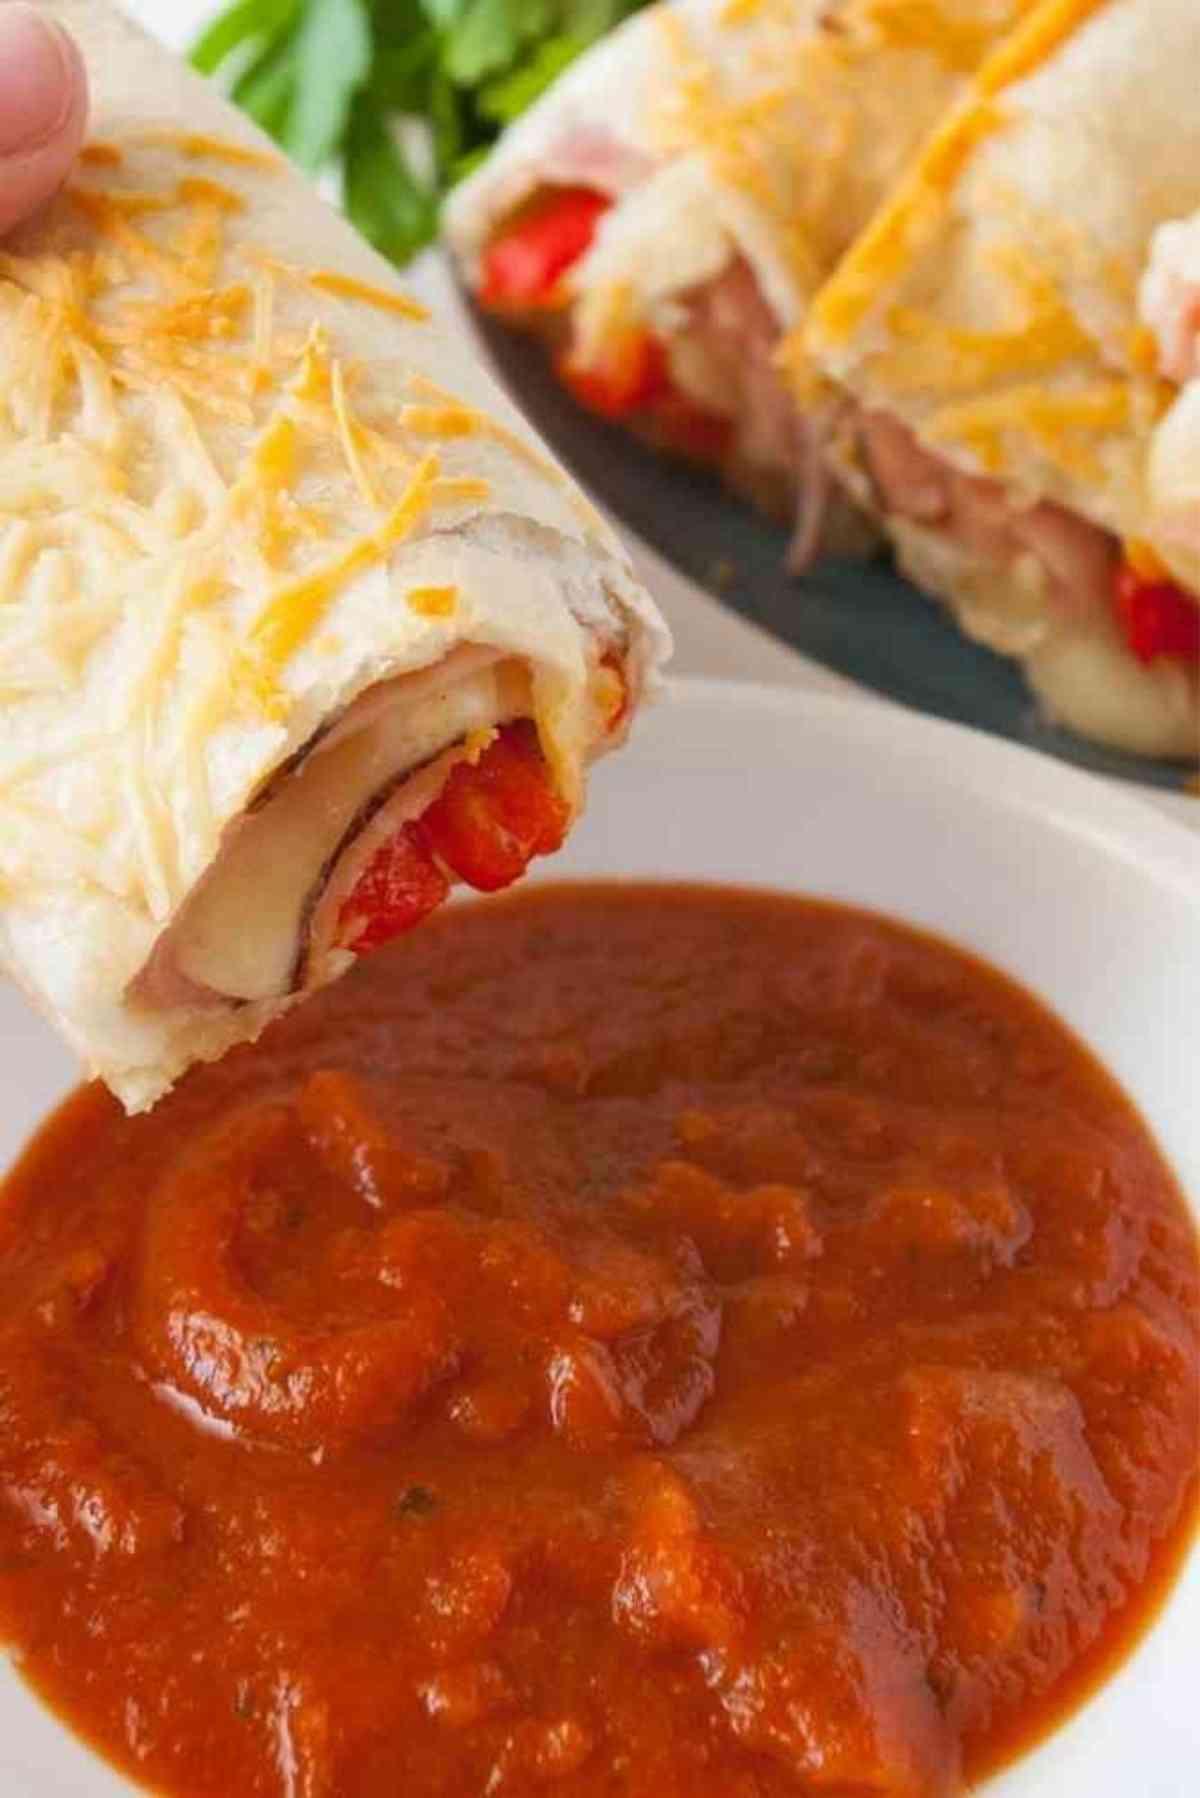 A hot ham and cheese roll up with a tortilla being dipped in pizza sauce.